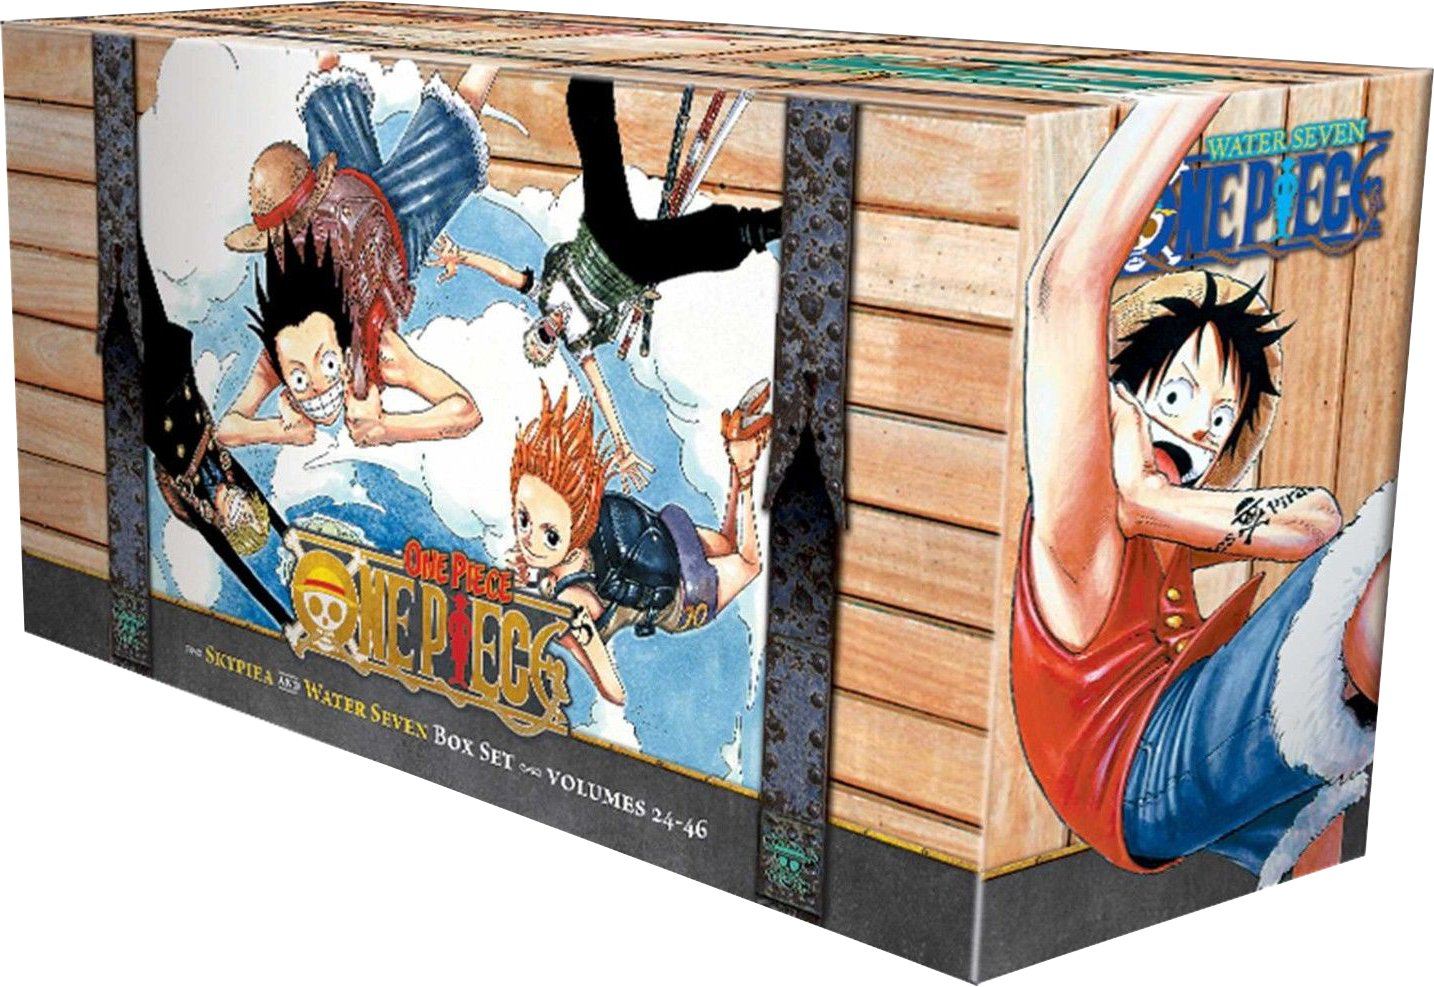 One Piece by Eiichiro Oda Box Set 2: Skypiea and Water Seven Vol. 24-46 23 Books - Ages 14+ - Paperback